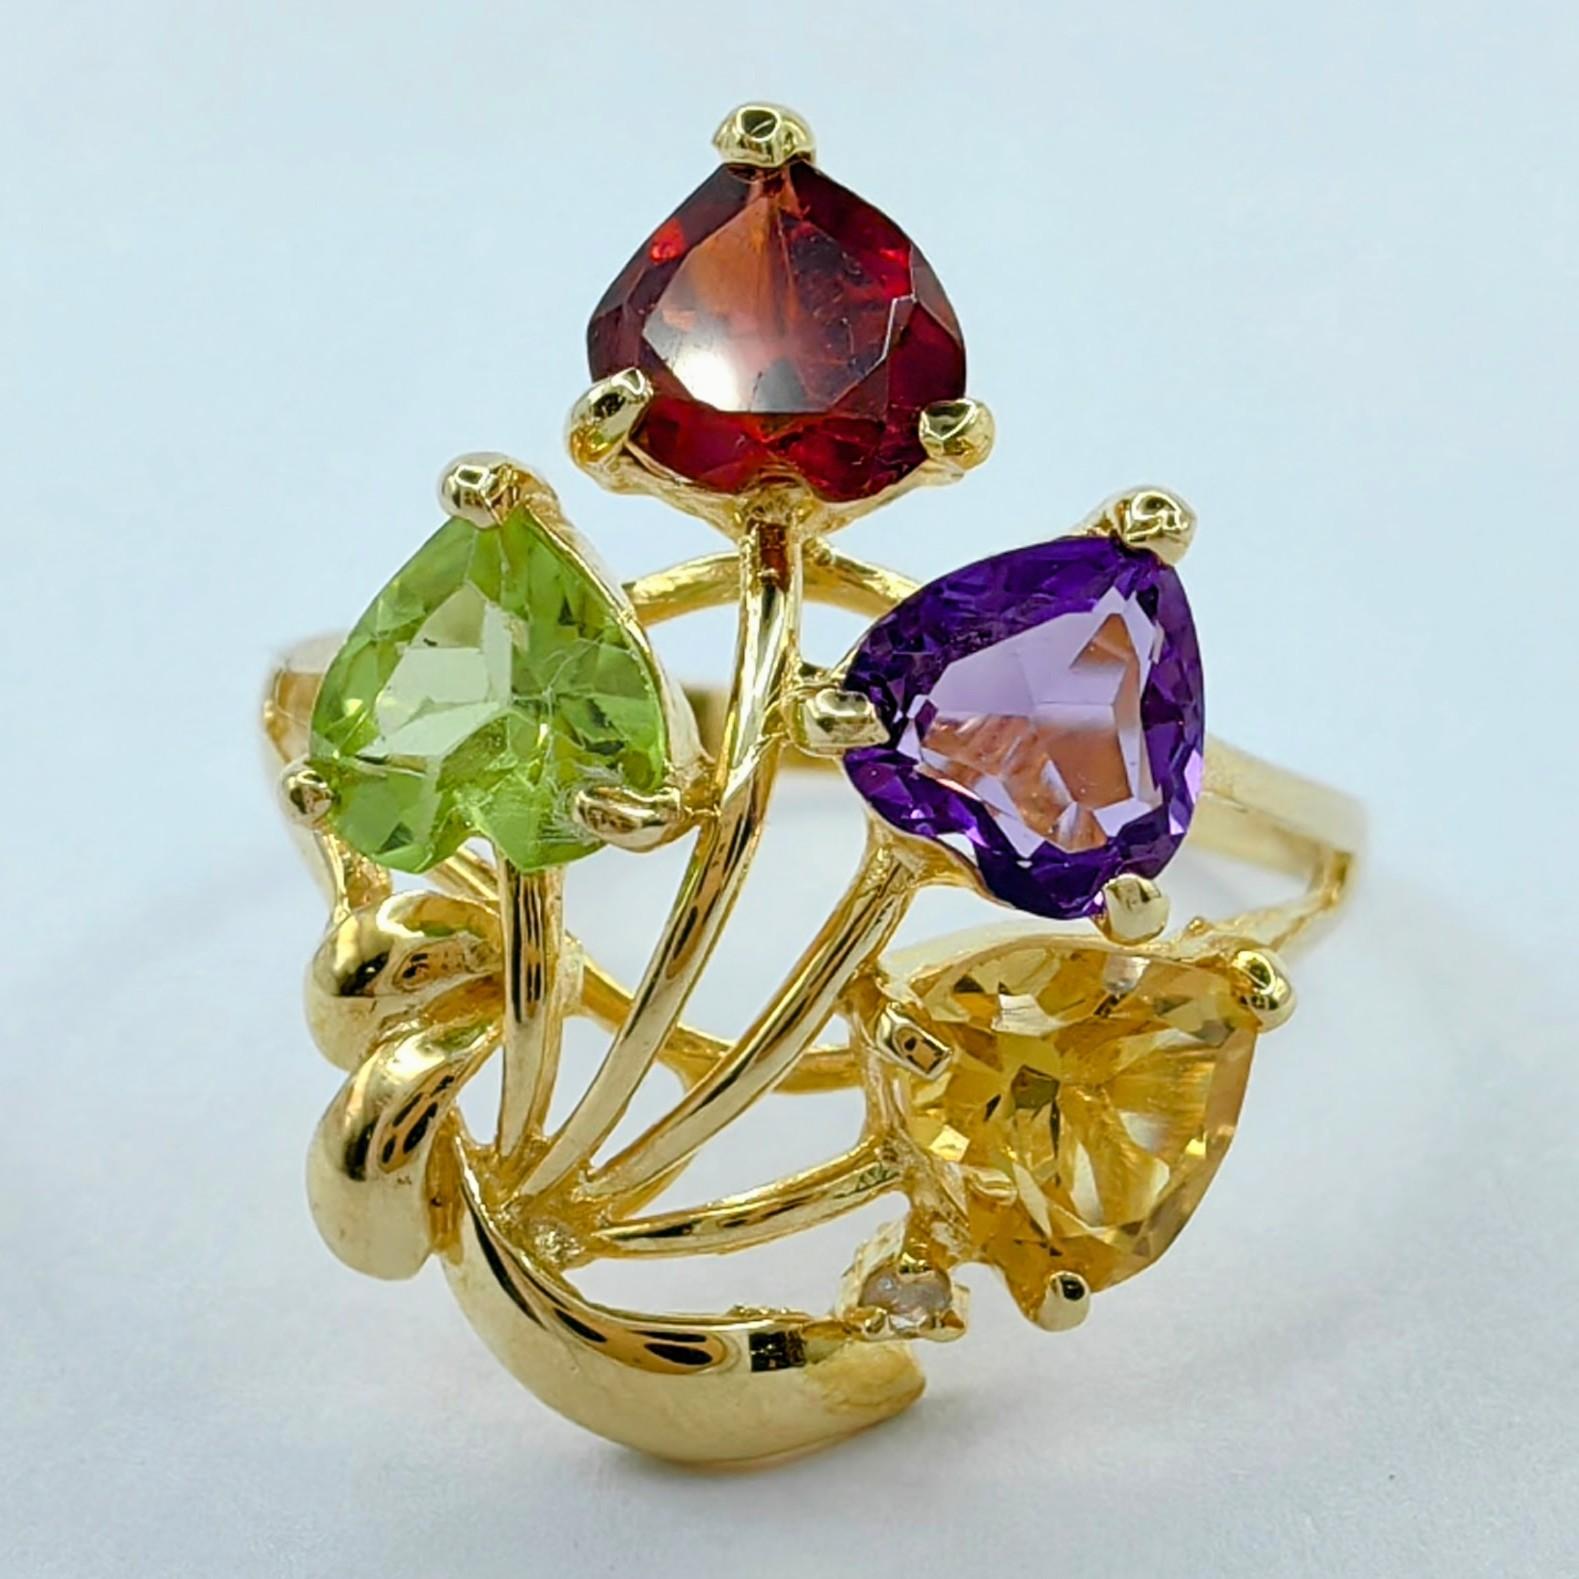 Introducing our stunning Heart-Cut Amethyst Citrine Garnet Peridot 14K Gold Ring & Necklace Pendant Set. This captivating set features a dainty and colorful pendant and a matching ring, both showcasing a charming blend of heart-cut amethyst,